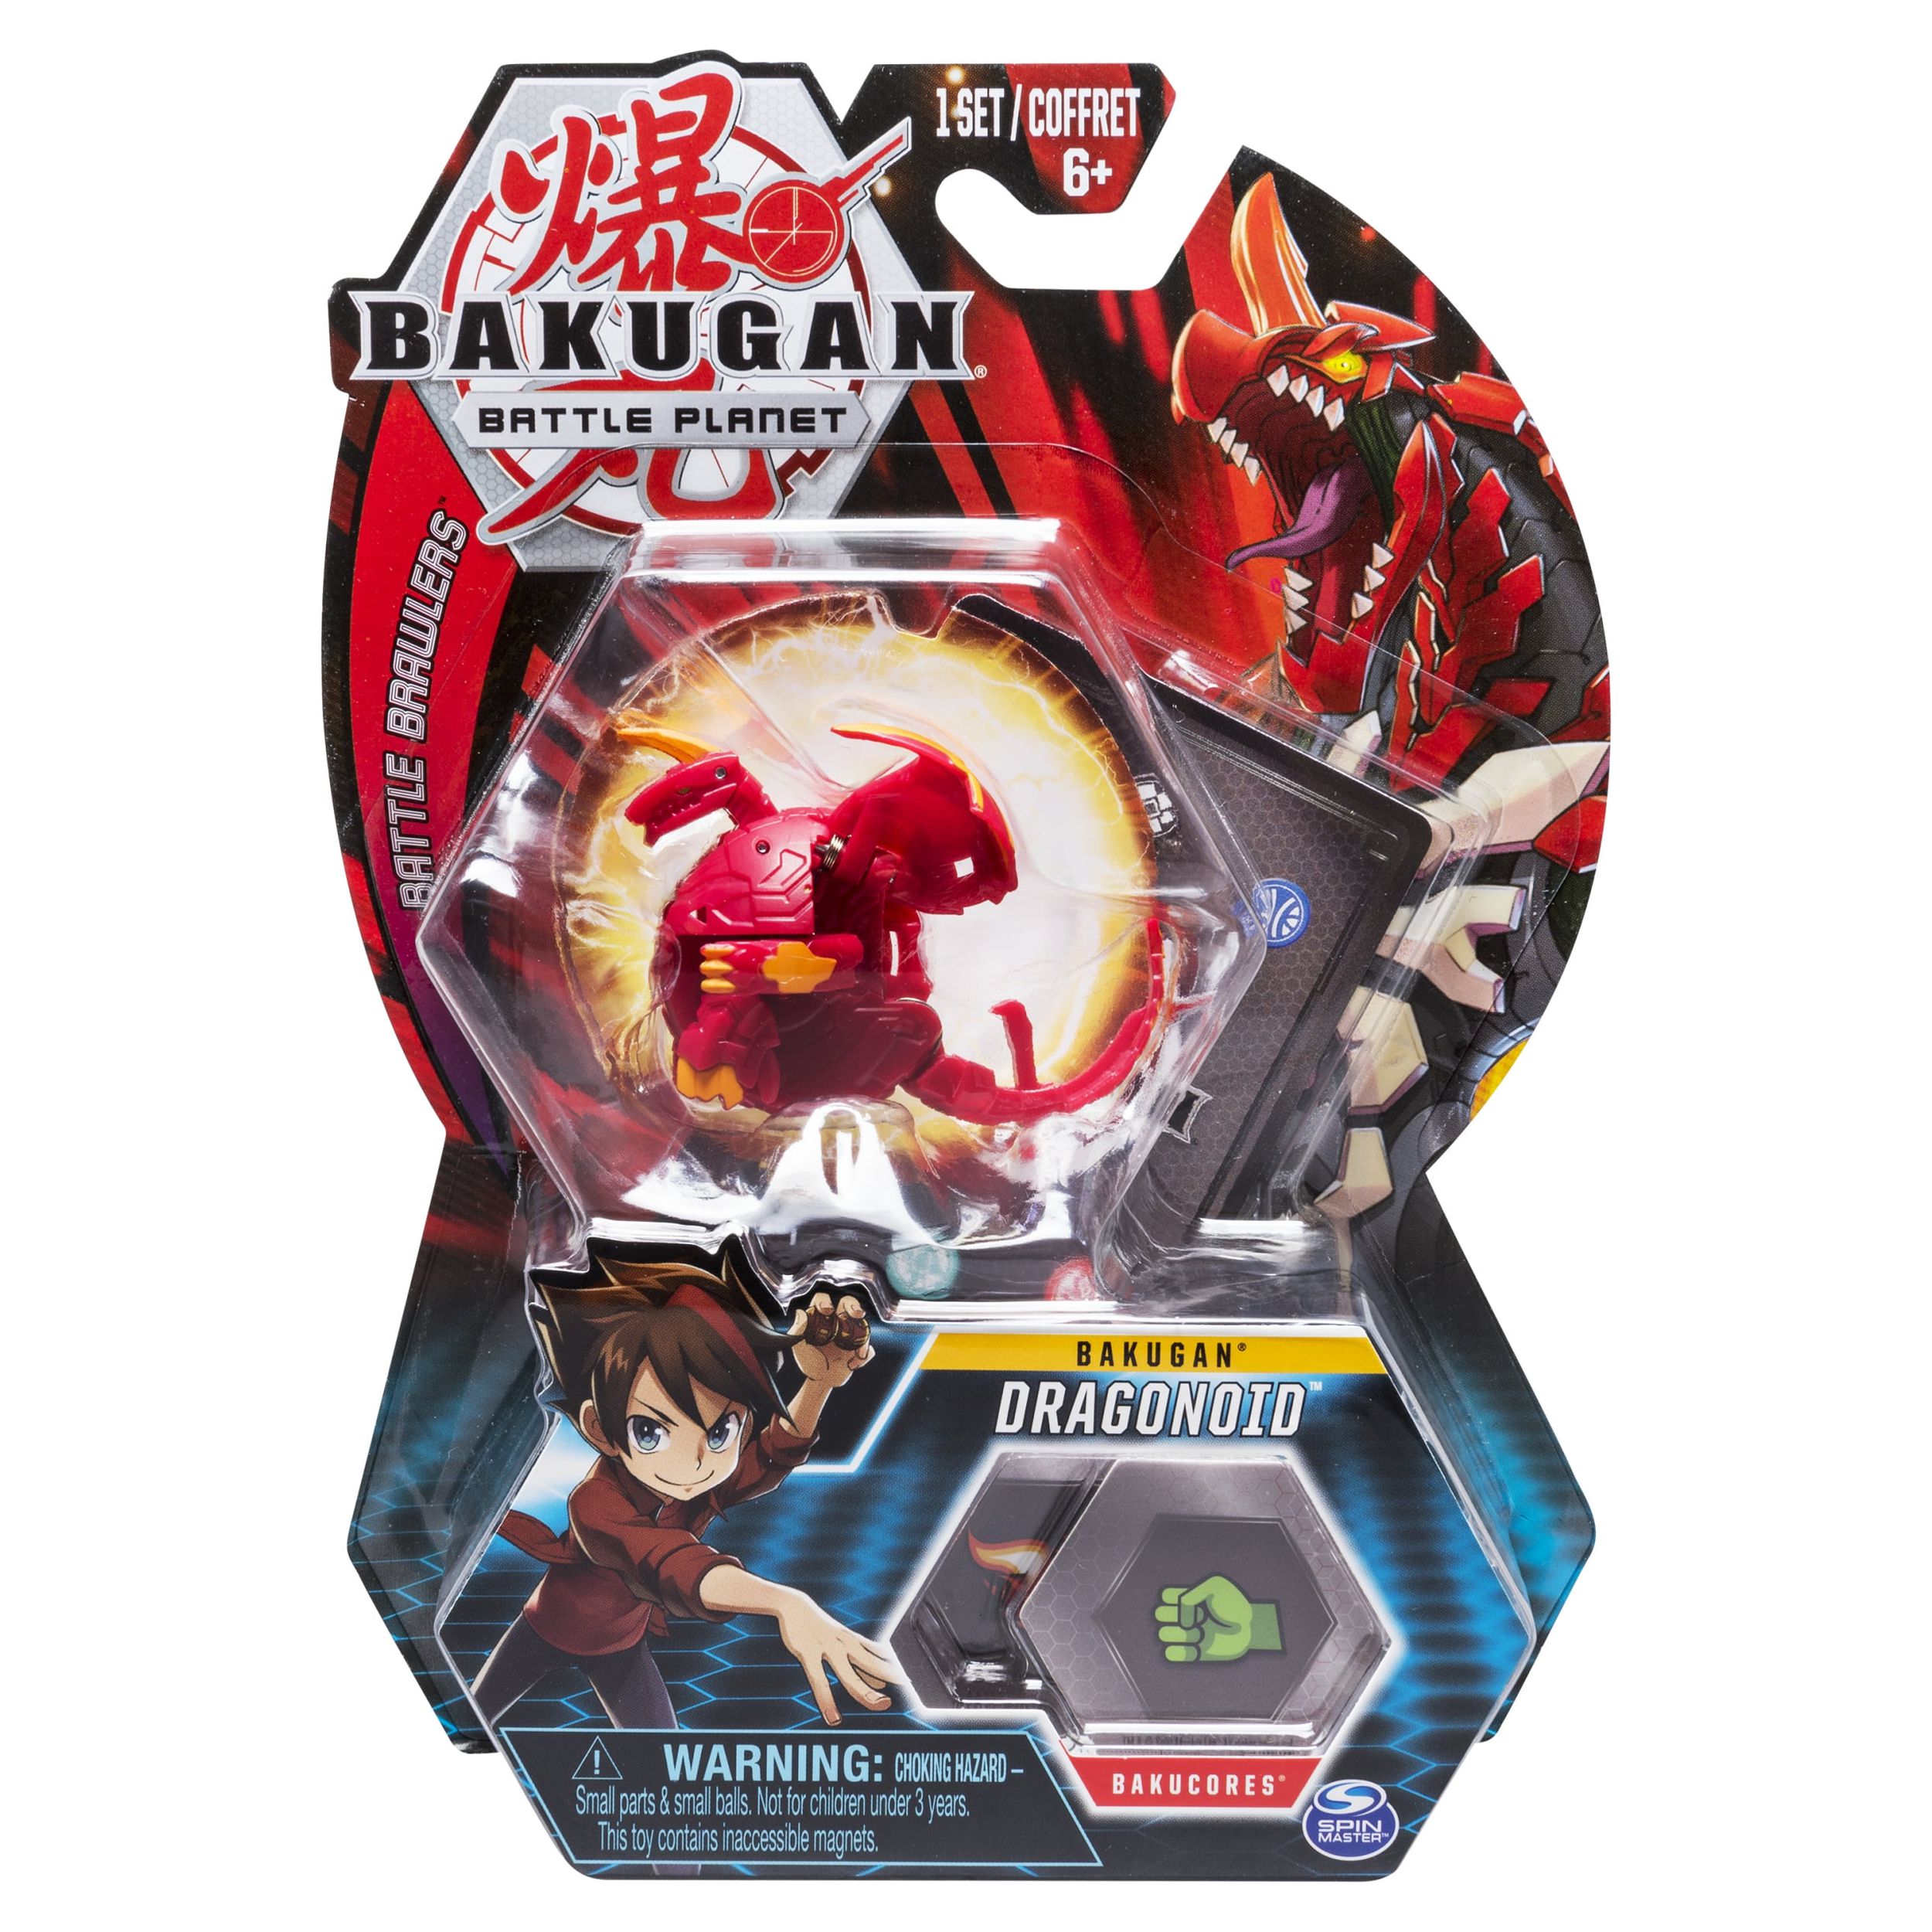 Bakugan, Dragonoid, 2-inch Tall Collectible Action Figure and Trading Card, for Ages 6 and Up - image 1 of 5